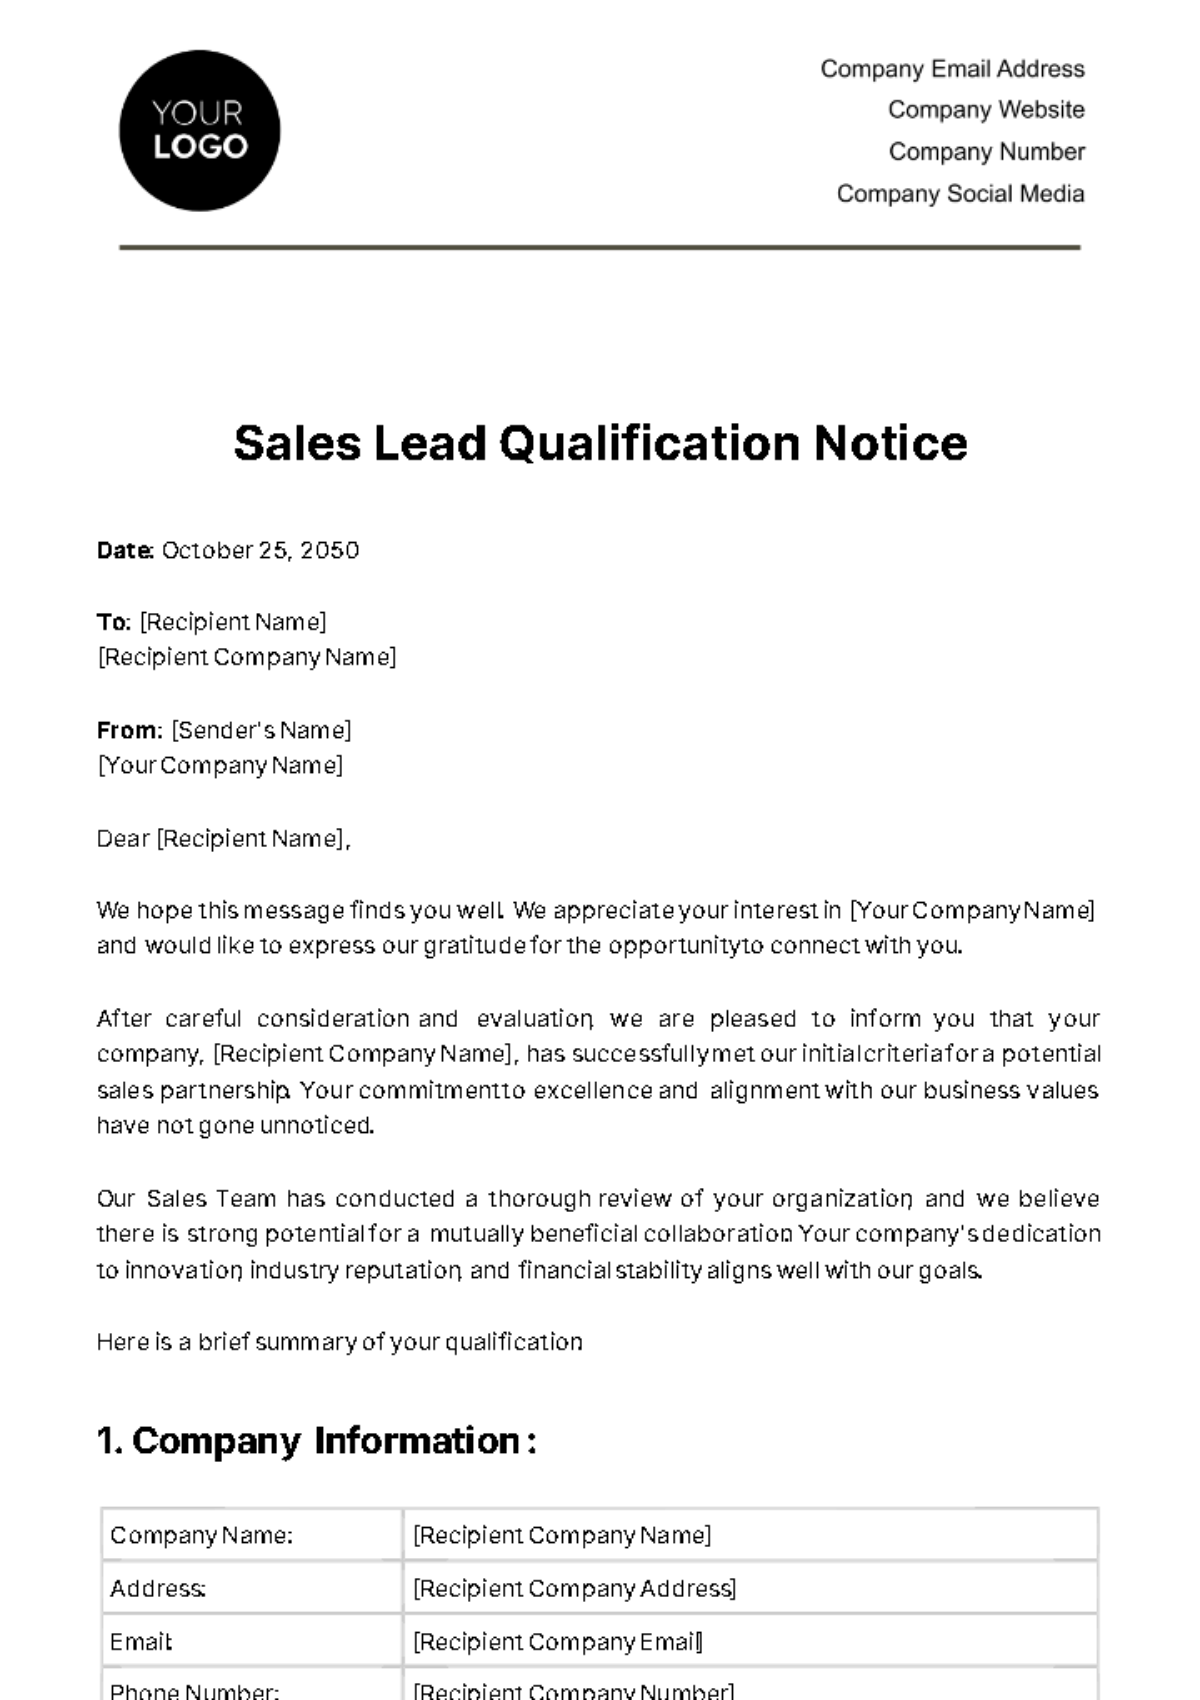 Free Sales Lead Qualification Notice Template